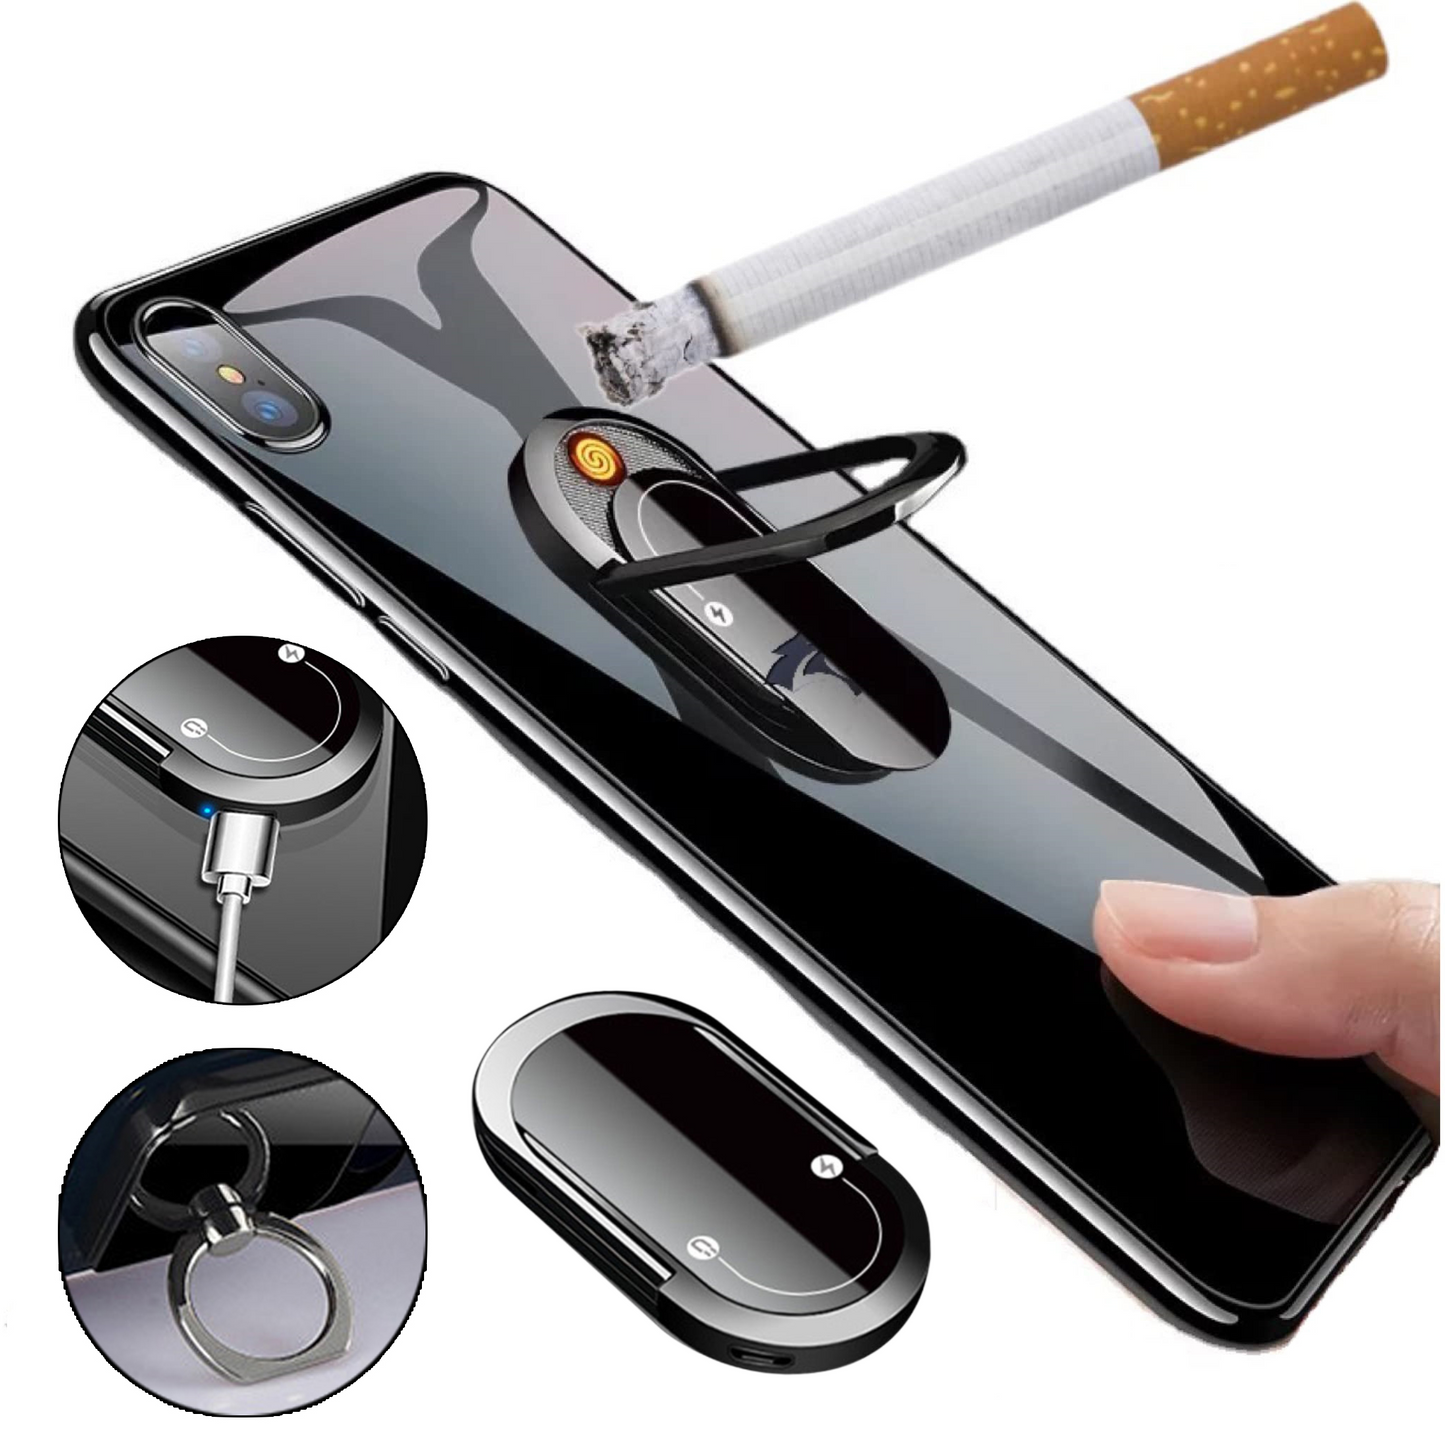 Multi-function USB rechargeable Cigarette Lighter and Phone Holder